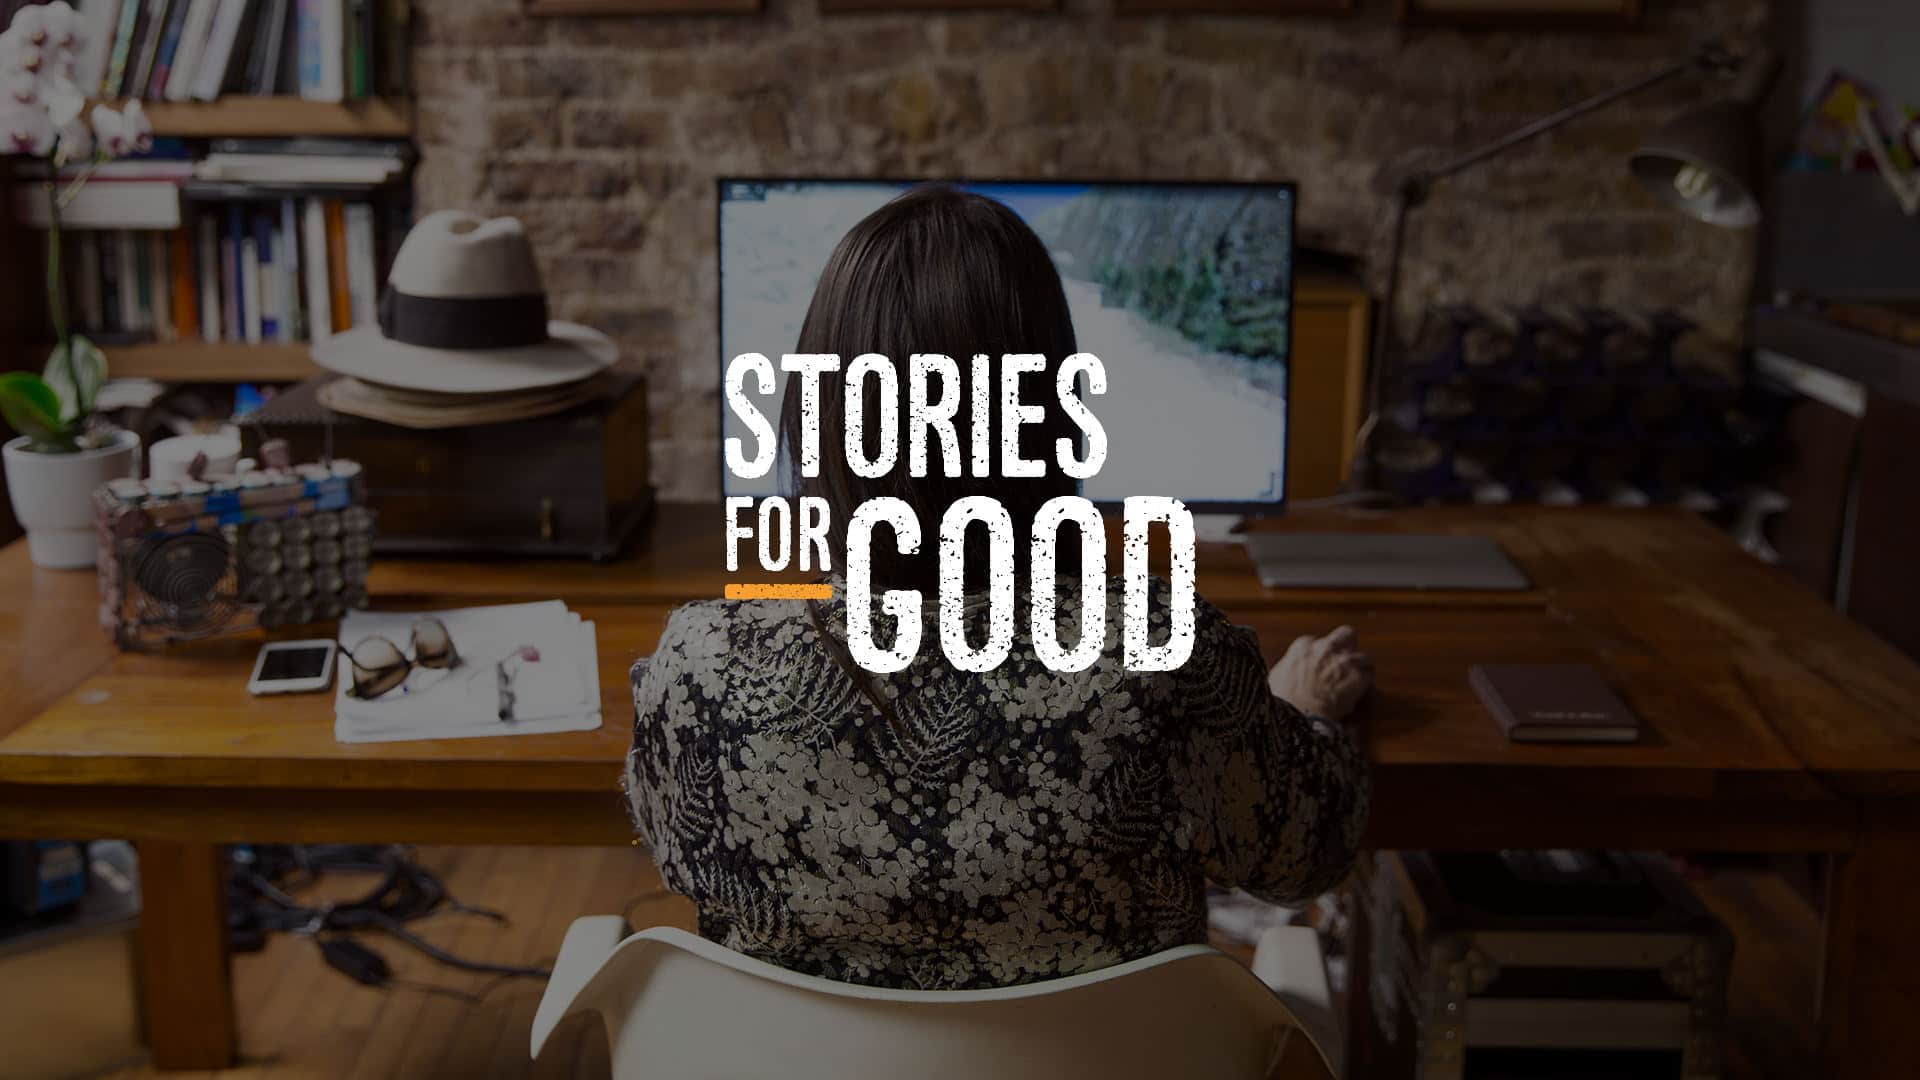 Our Partnership with Stories for Good